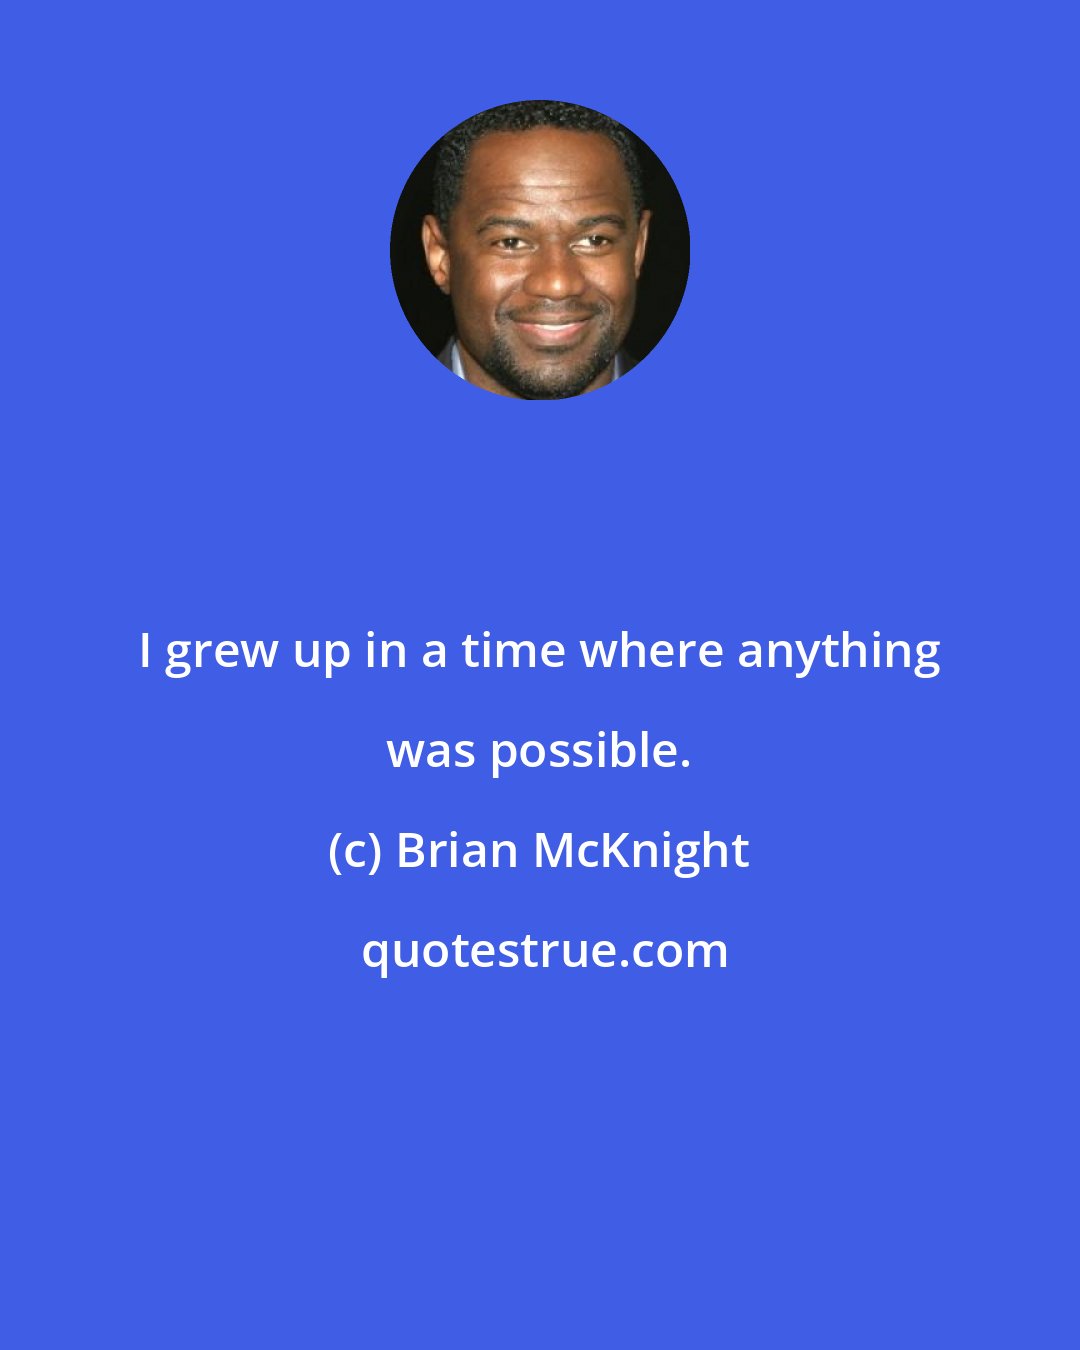 Brian McKnight: I grew up in a time where anything was possible.